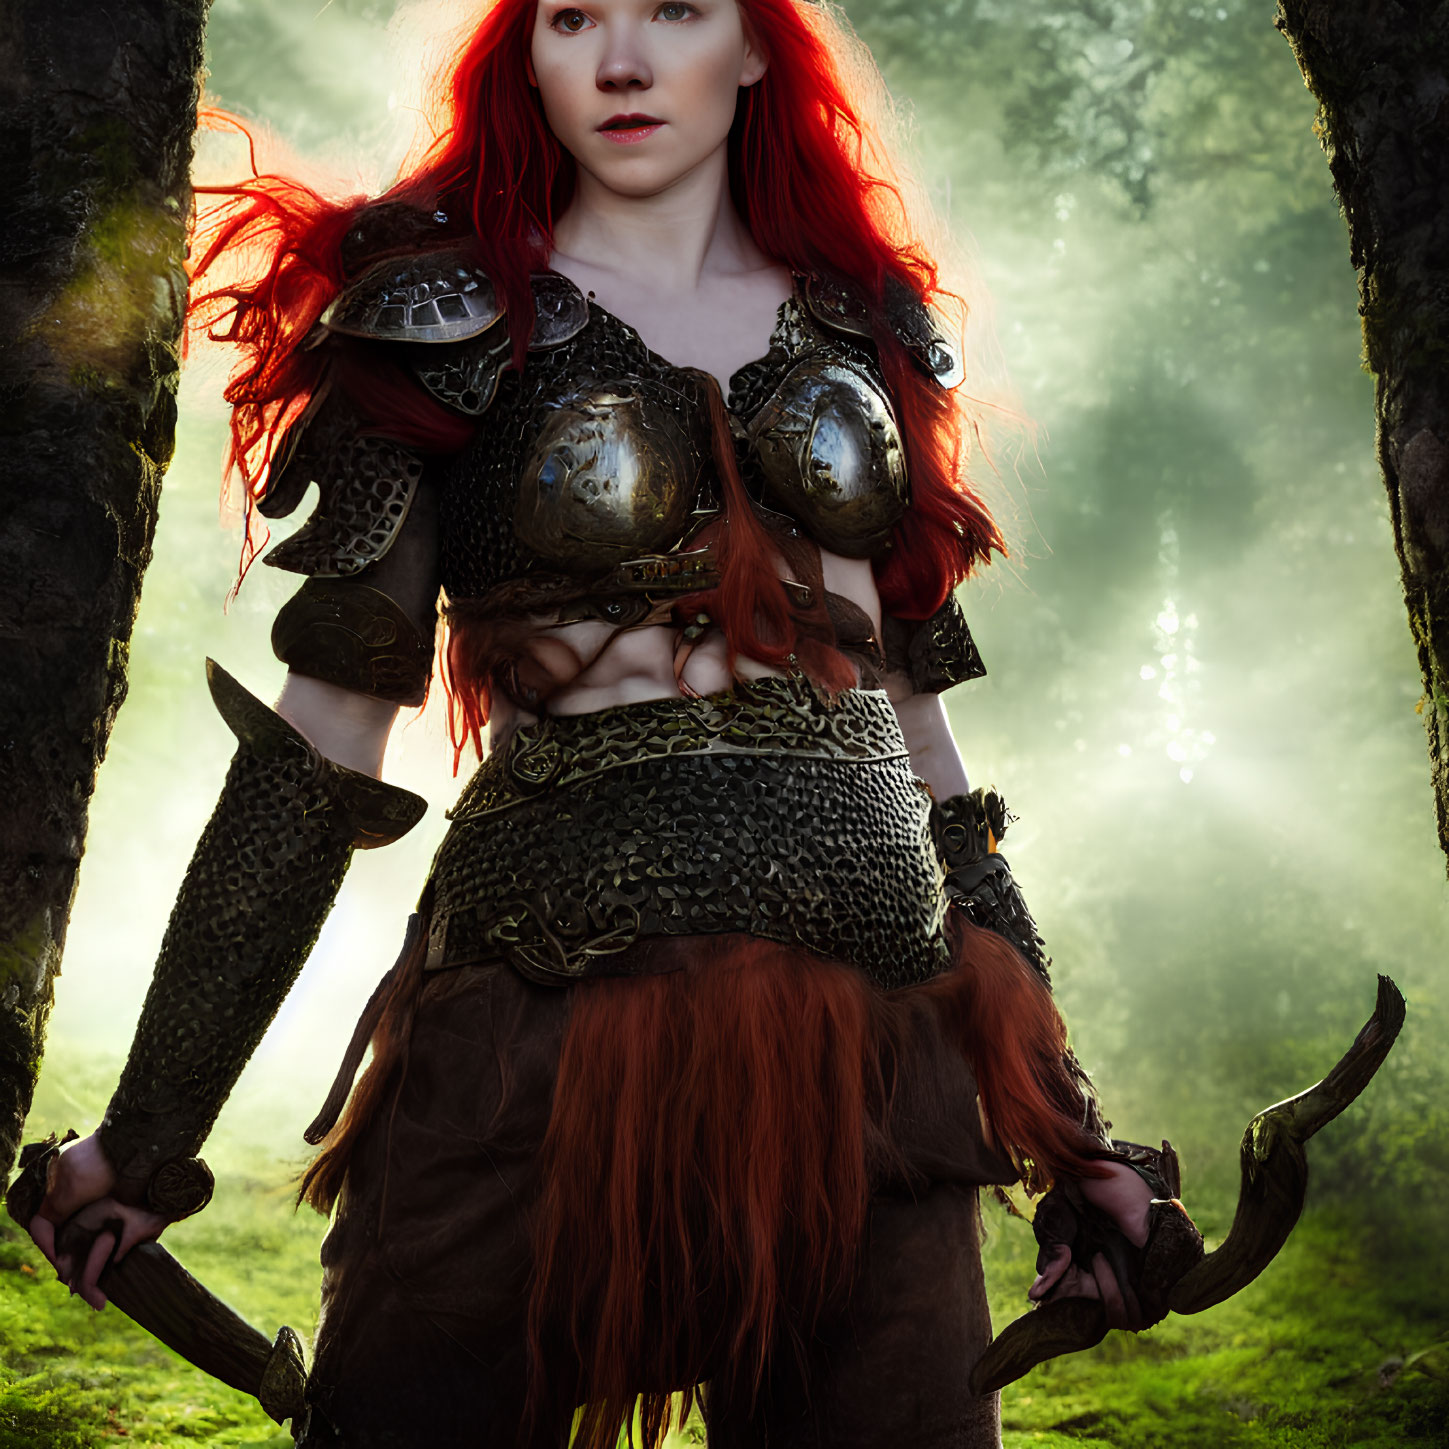 Red-Haired Warrior in Fantasy Armor Wielding Blades in Misty Forest